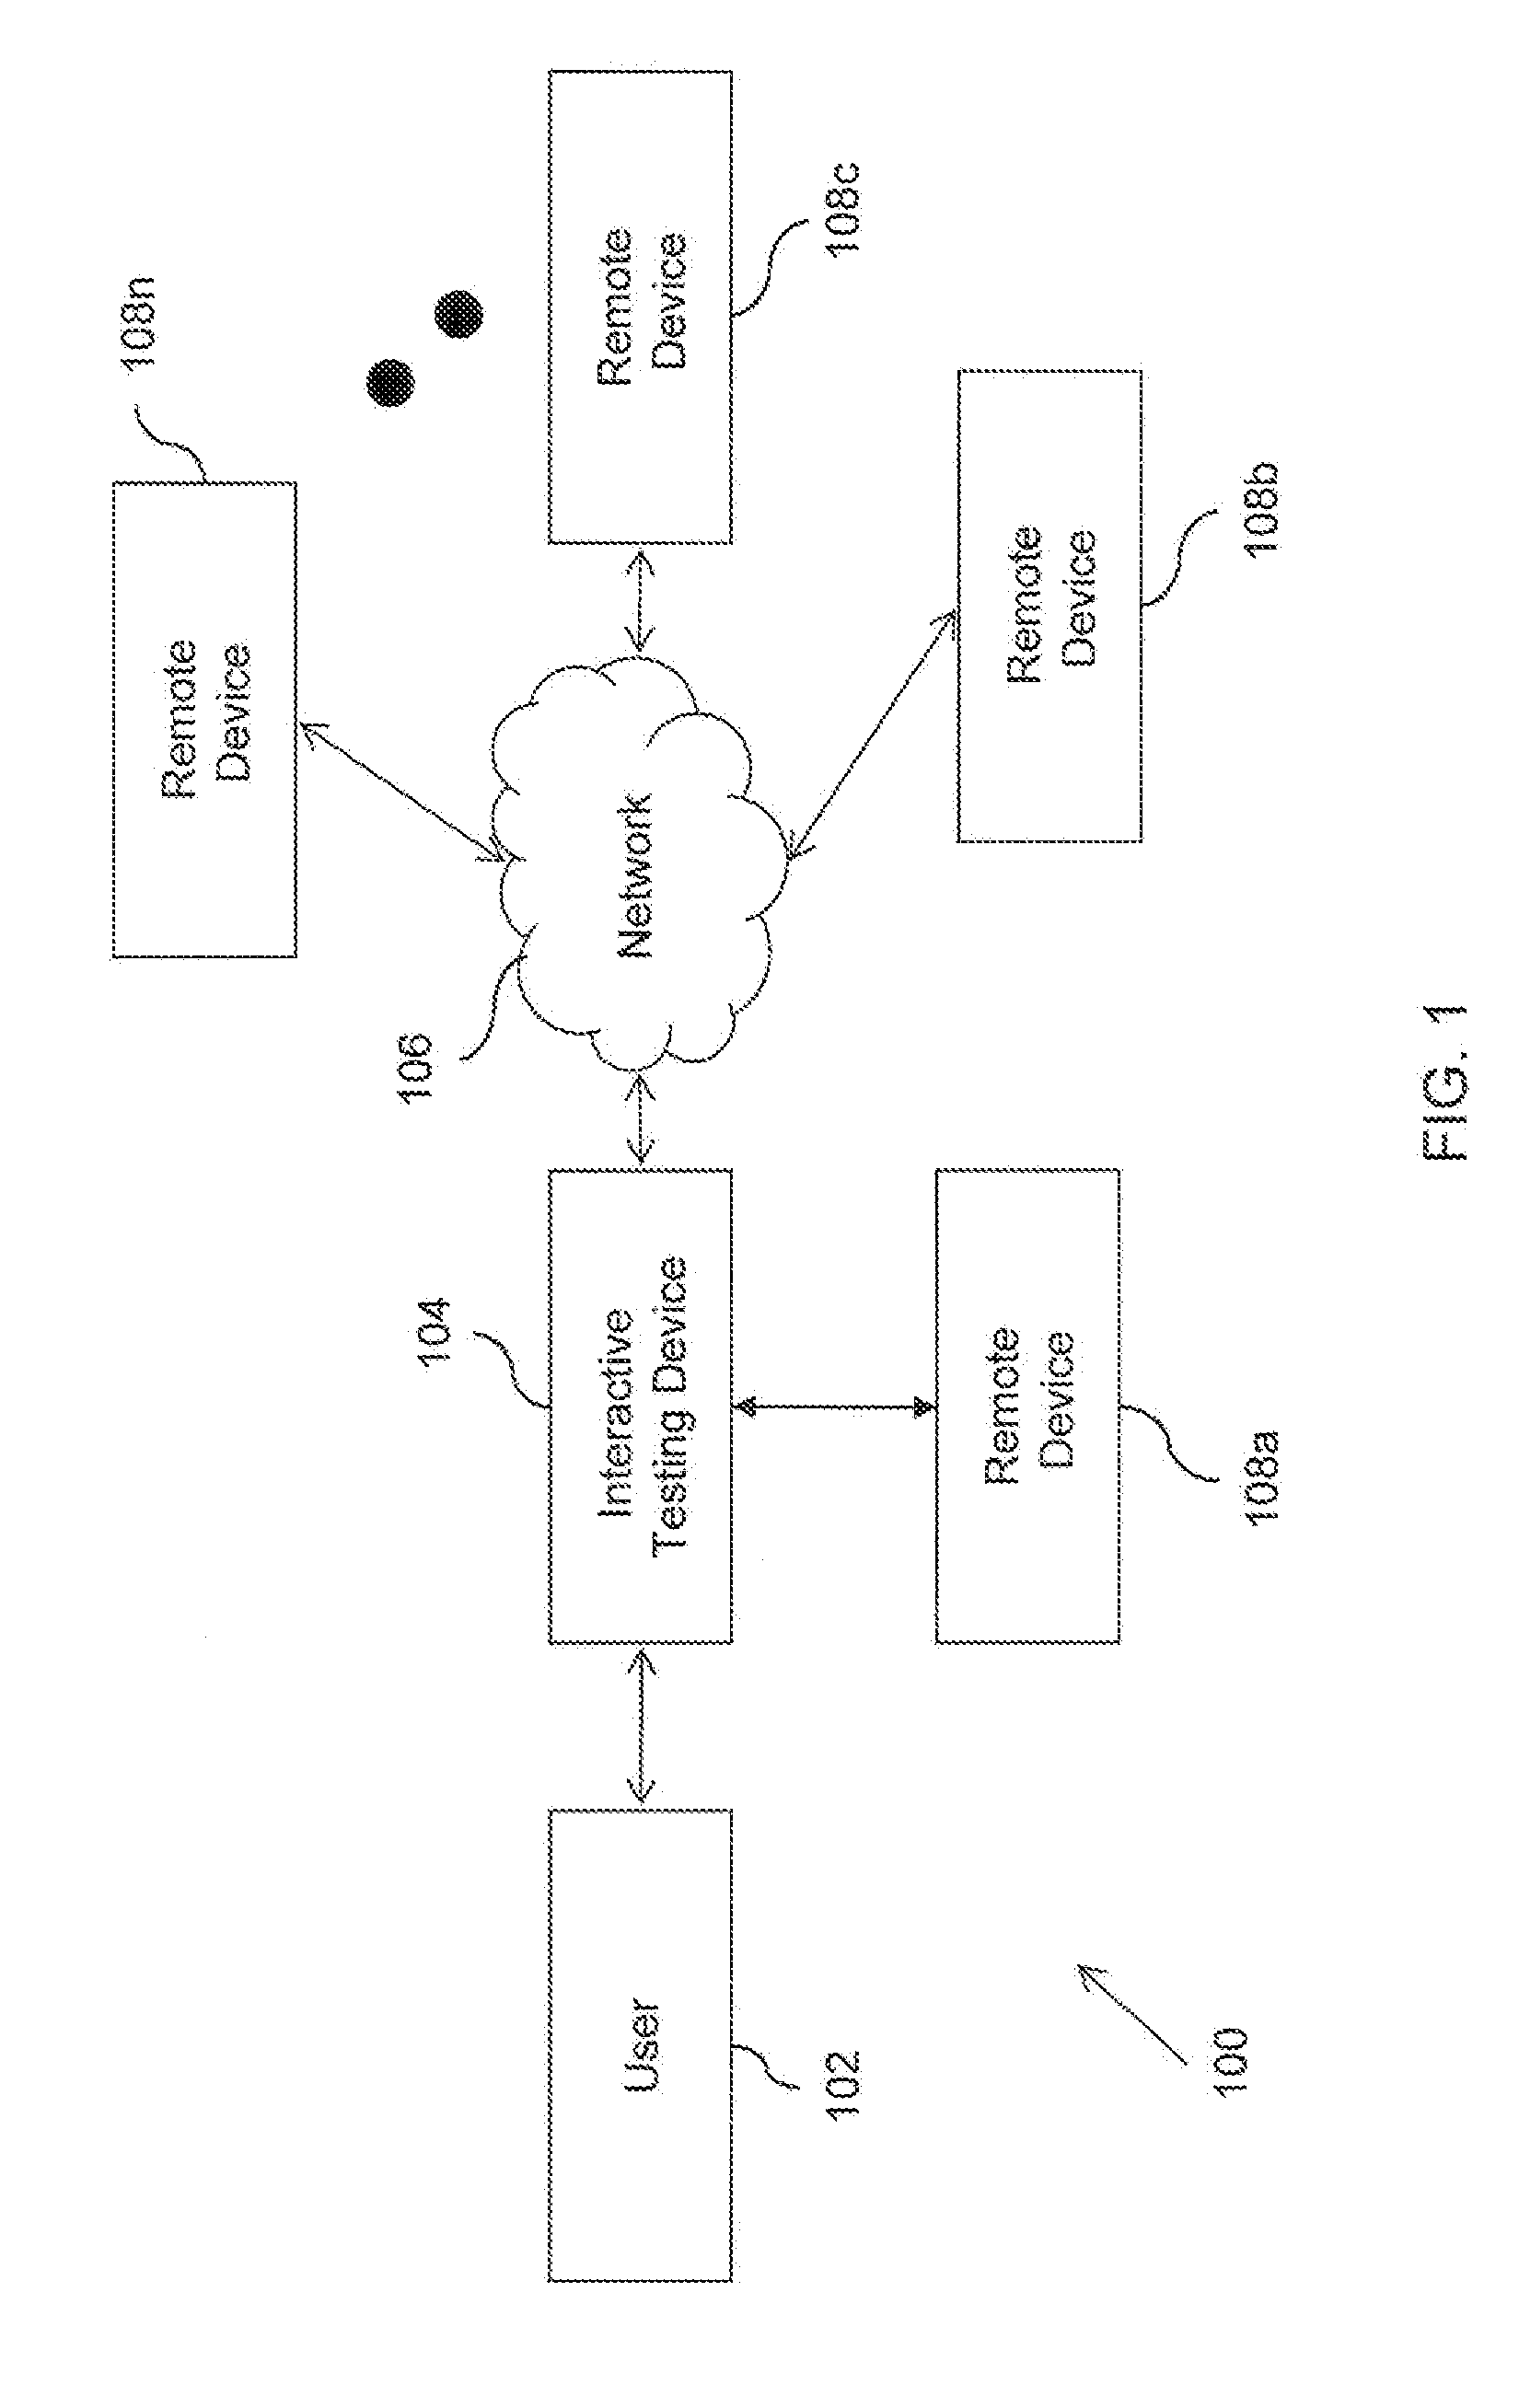 Systems and Methods for Interactive Testing of a Computer Application